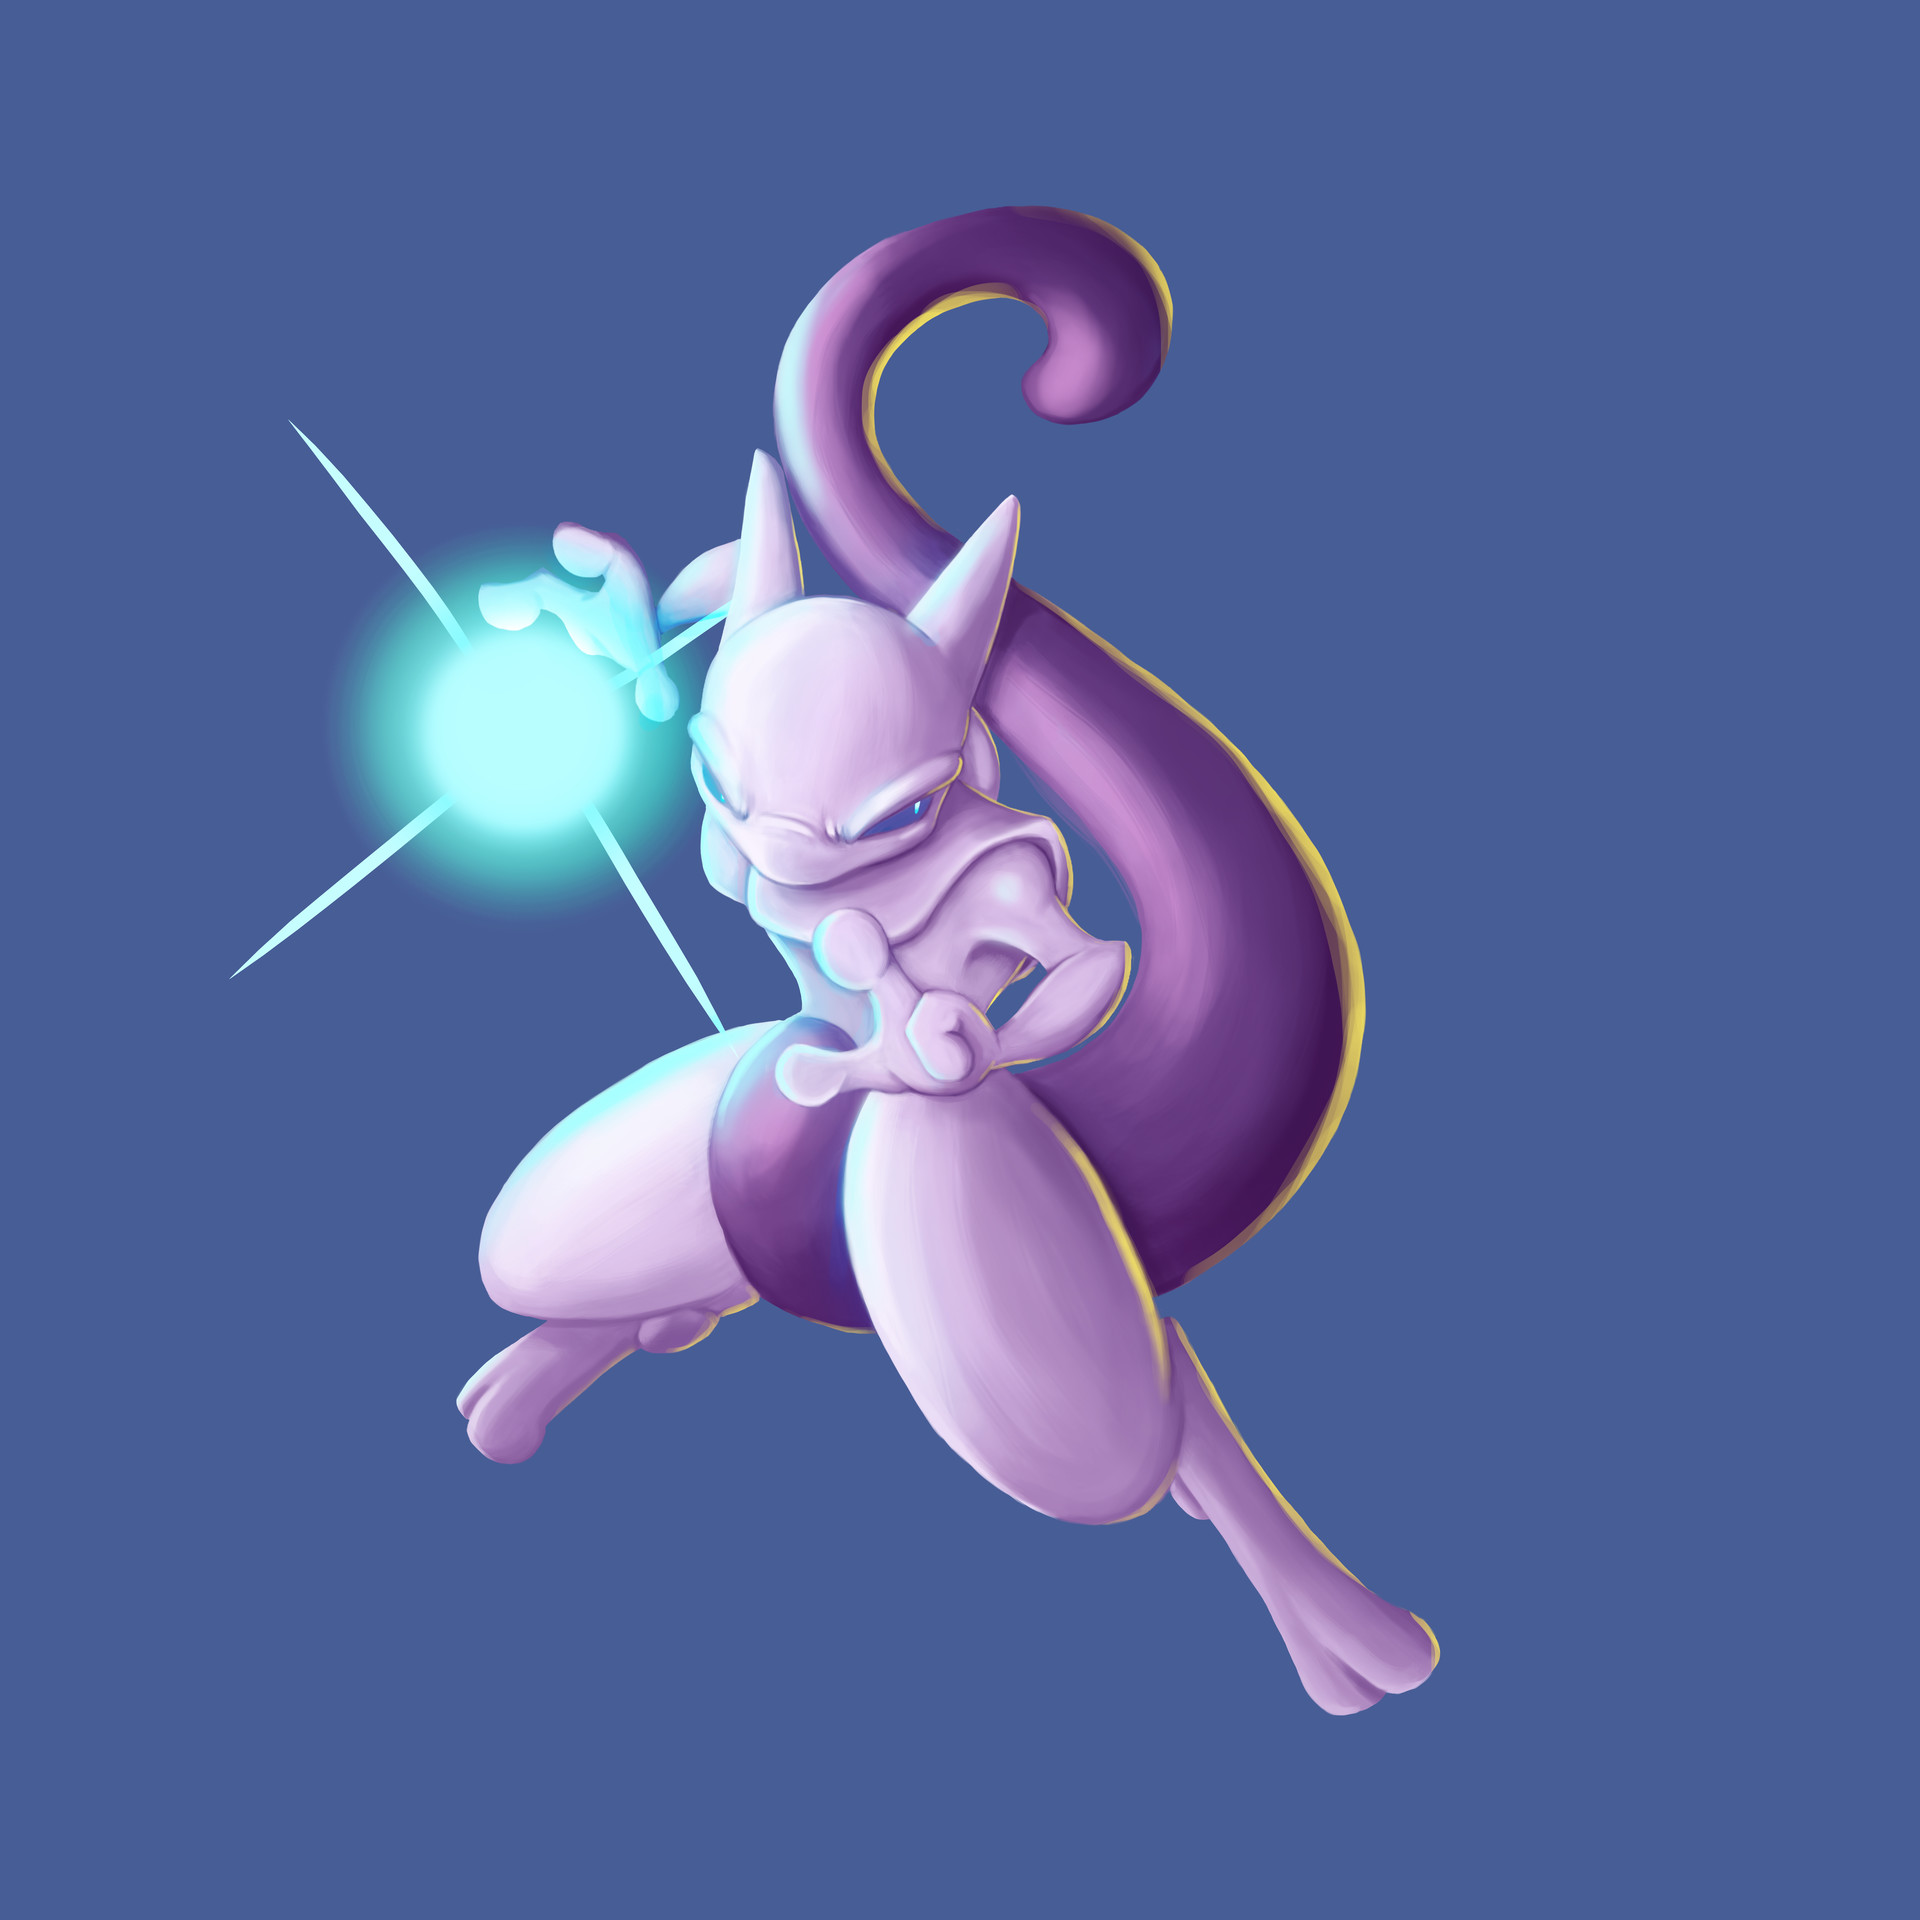 ...Kevin-Mark Bonein, who did an amazing work with the FX on my drawing of Mewtwo...